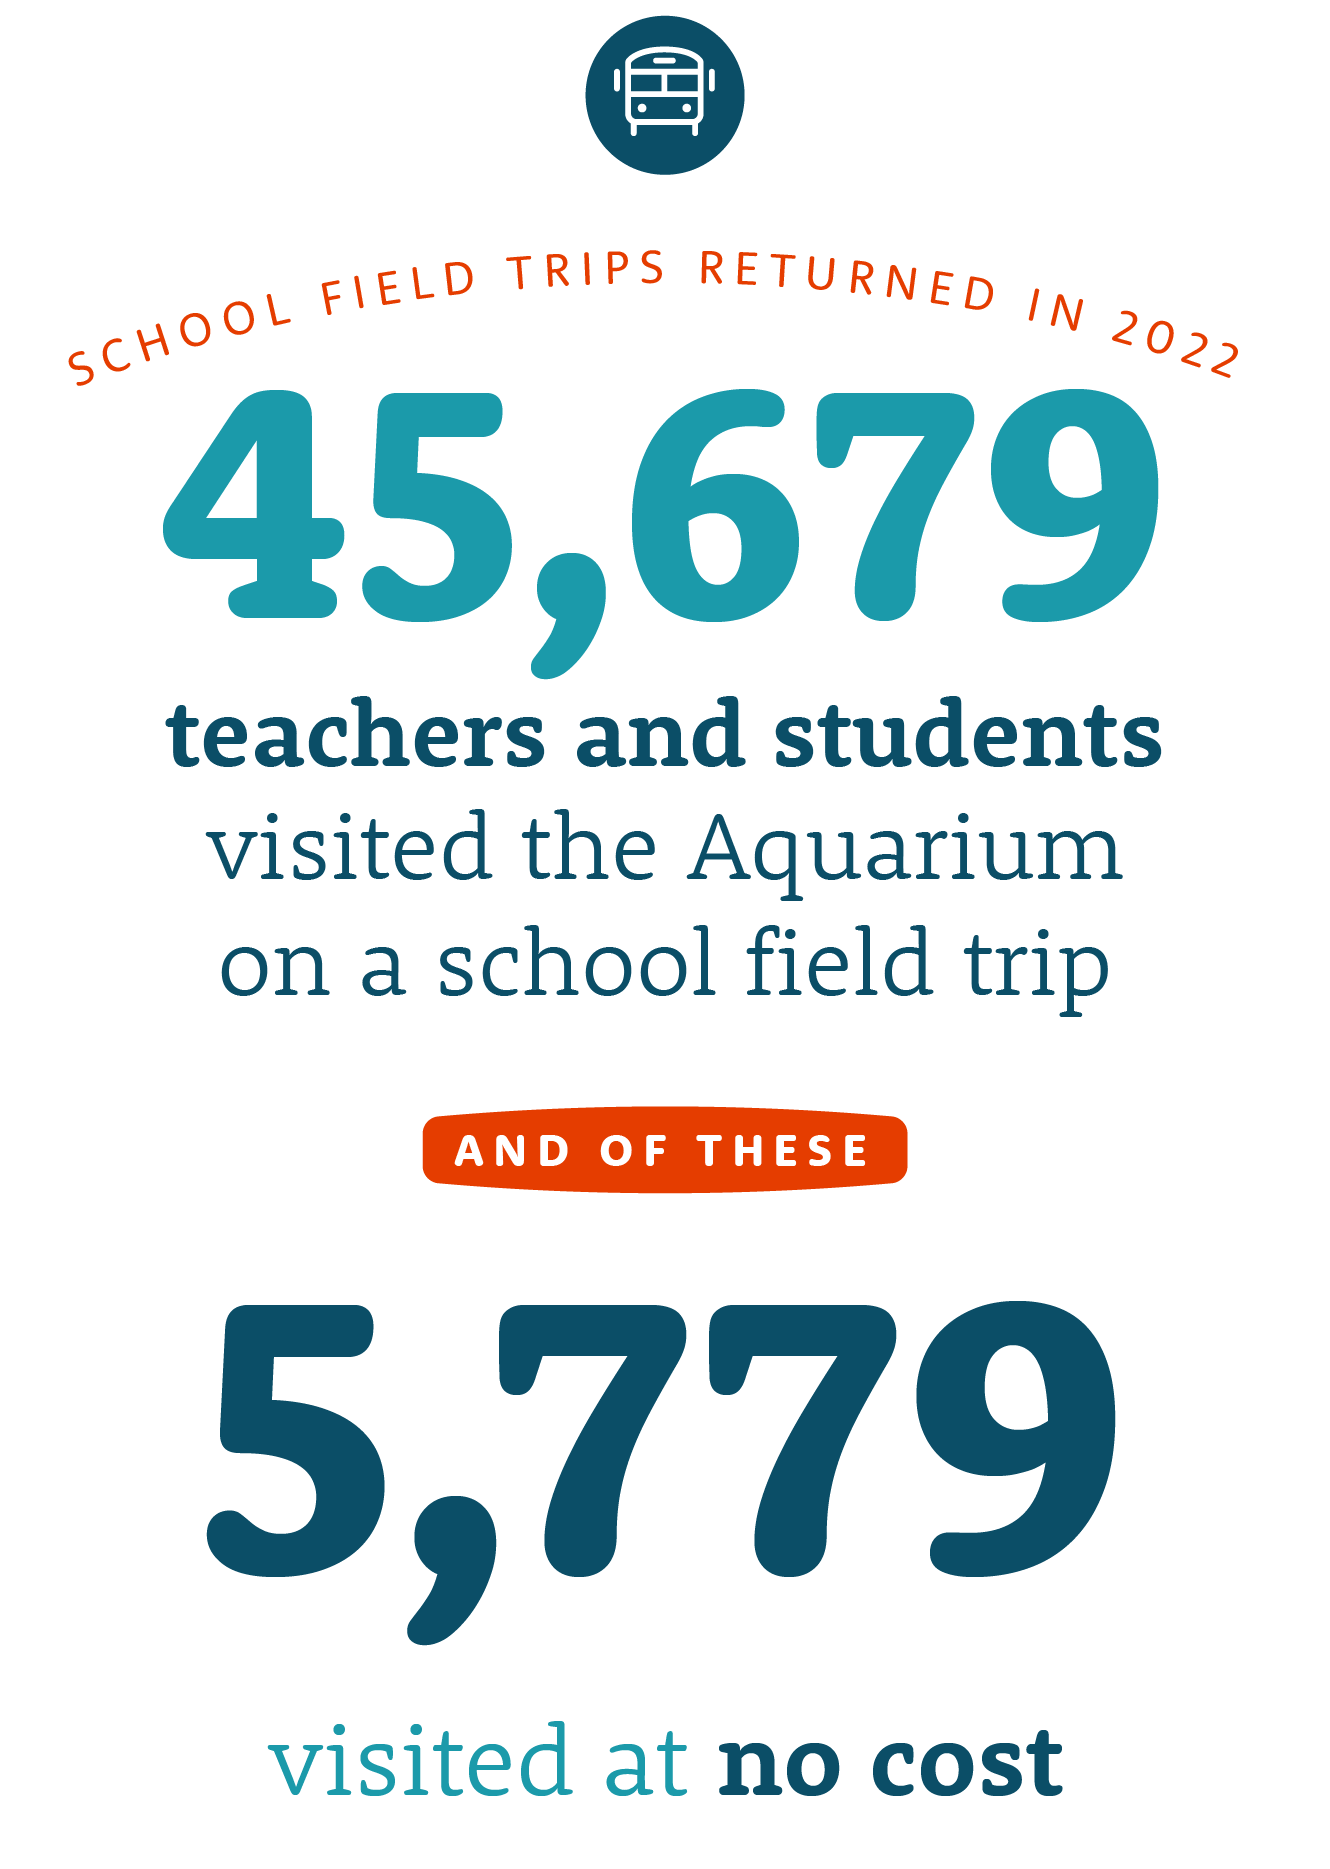 School field trips infographic - School fields trips returned in 2022 - 45,679 teachers and students visited the Aquarium on a school field trip and of these 5,779 visited at no cost.